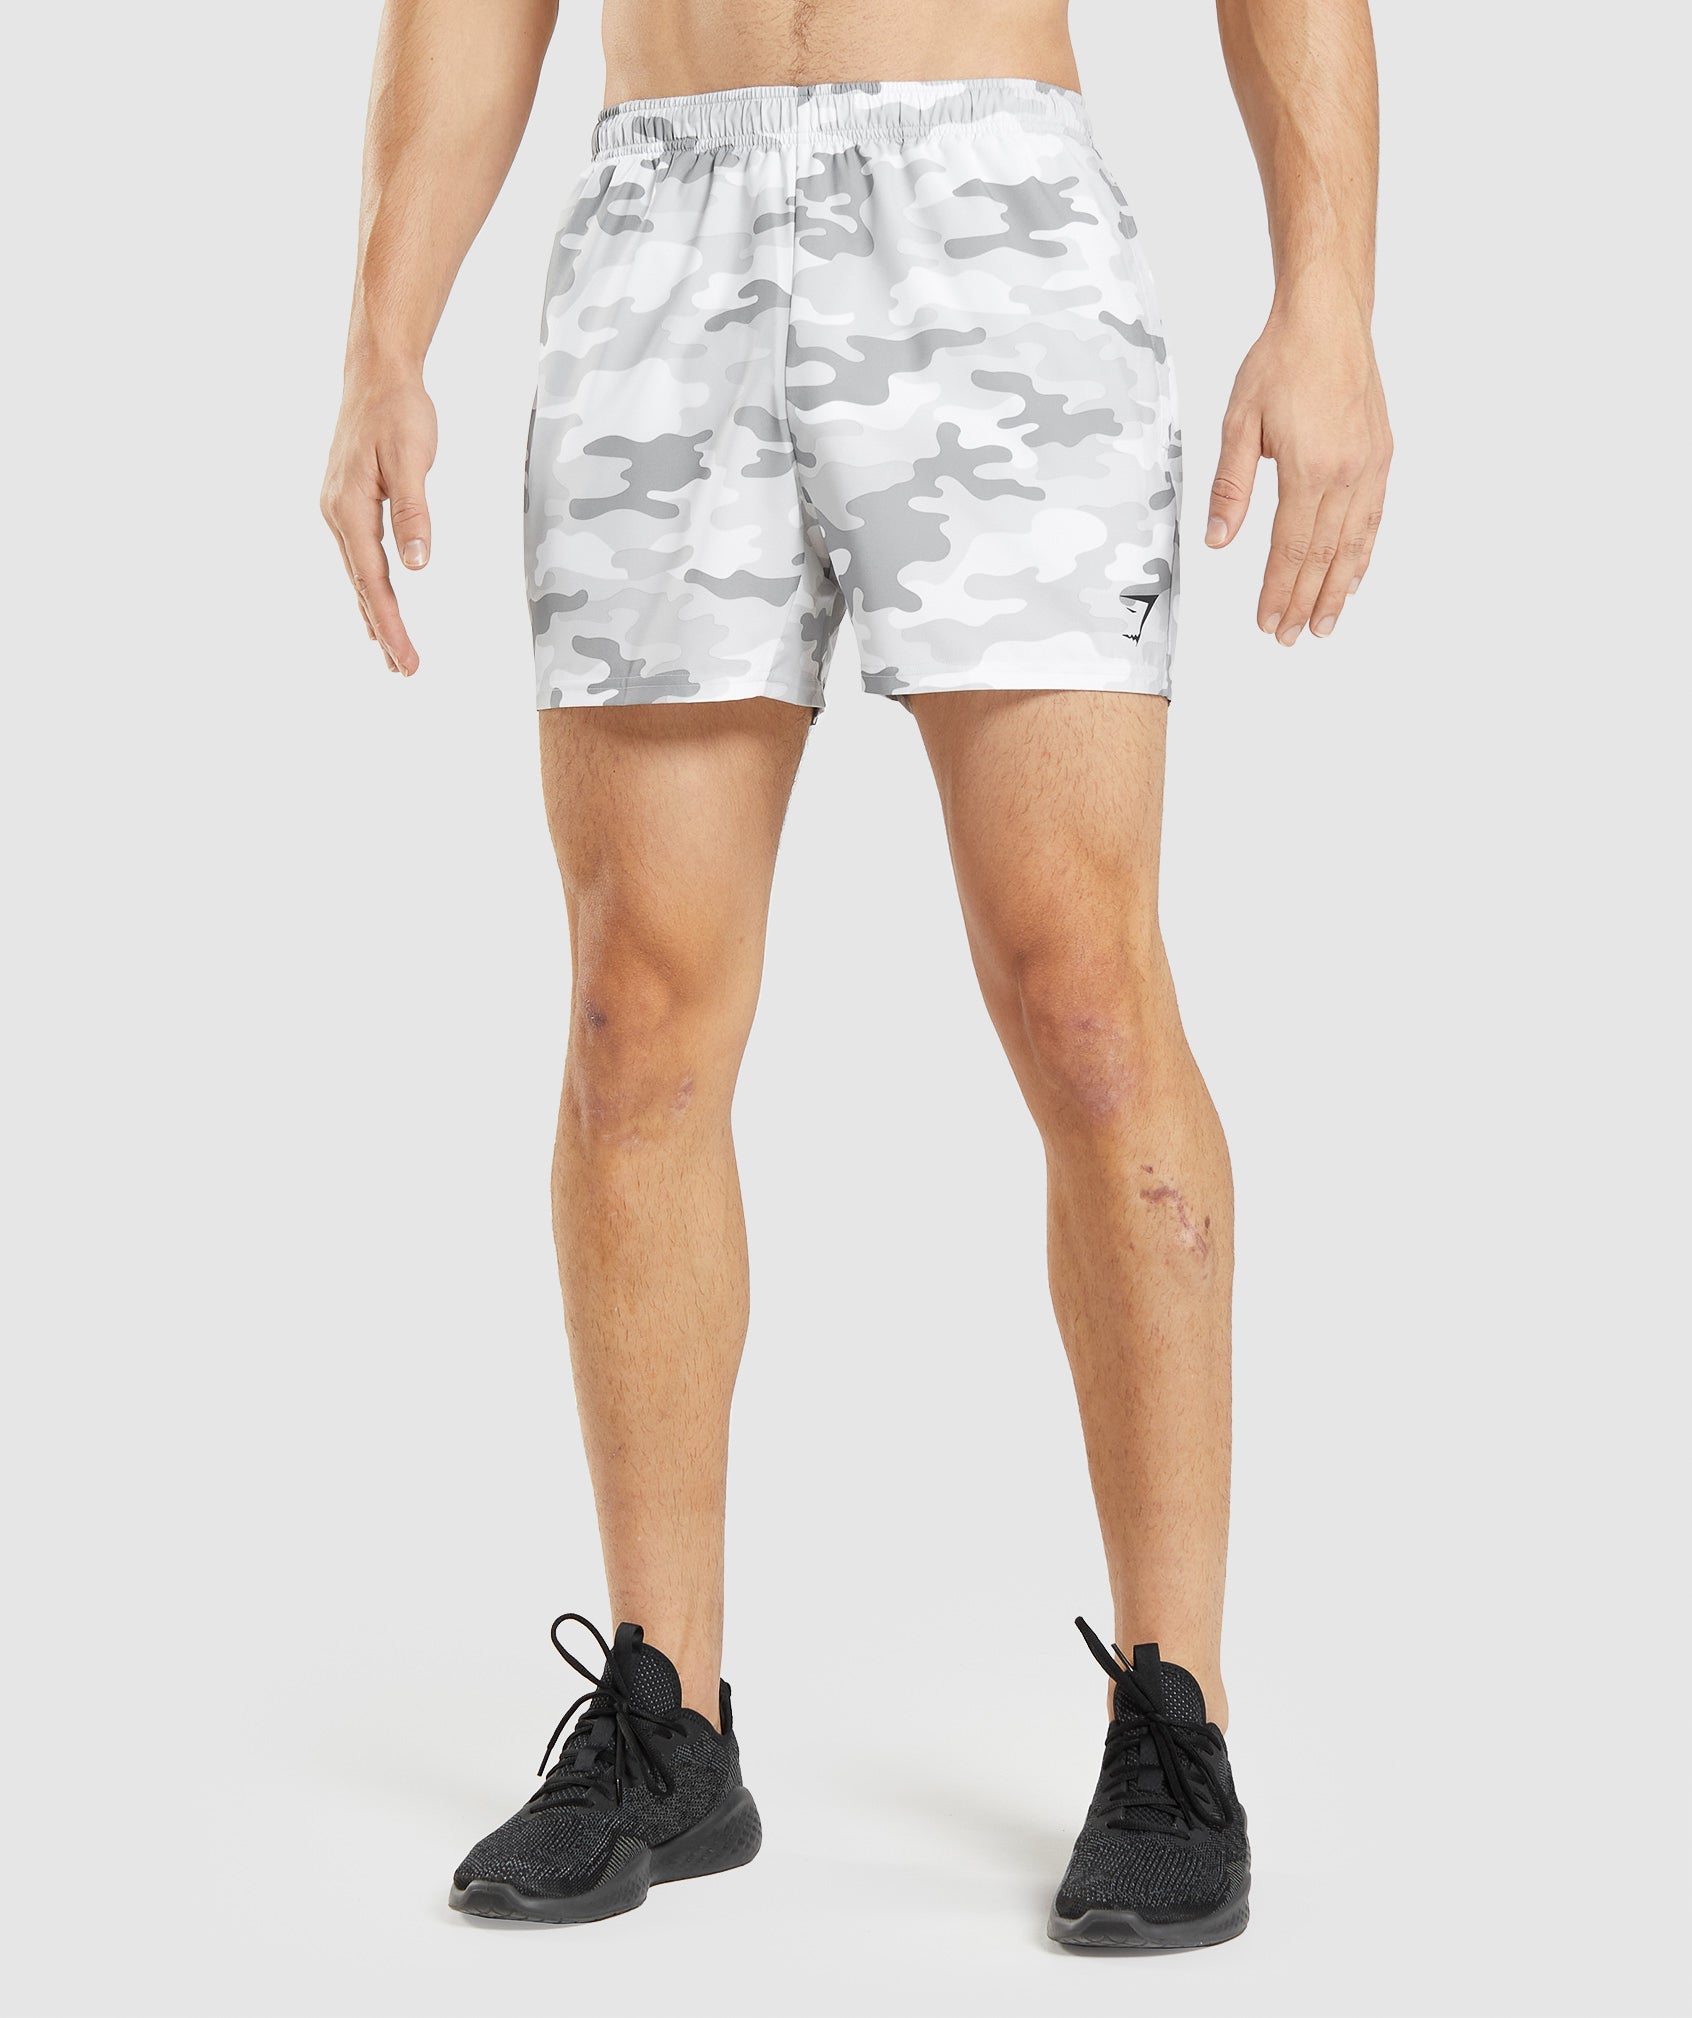 Gymshark Arrival Shorts Mens Size S Gray Camo Print 7 Inseam Active  Running